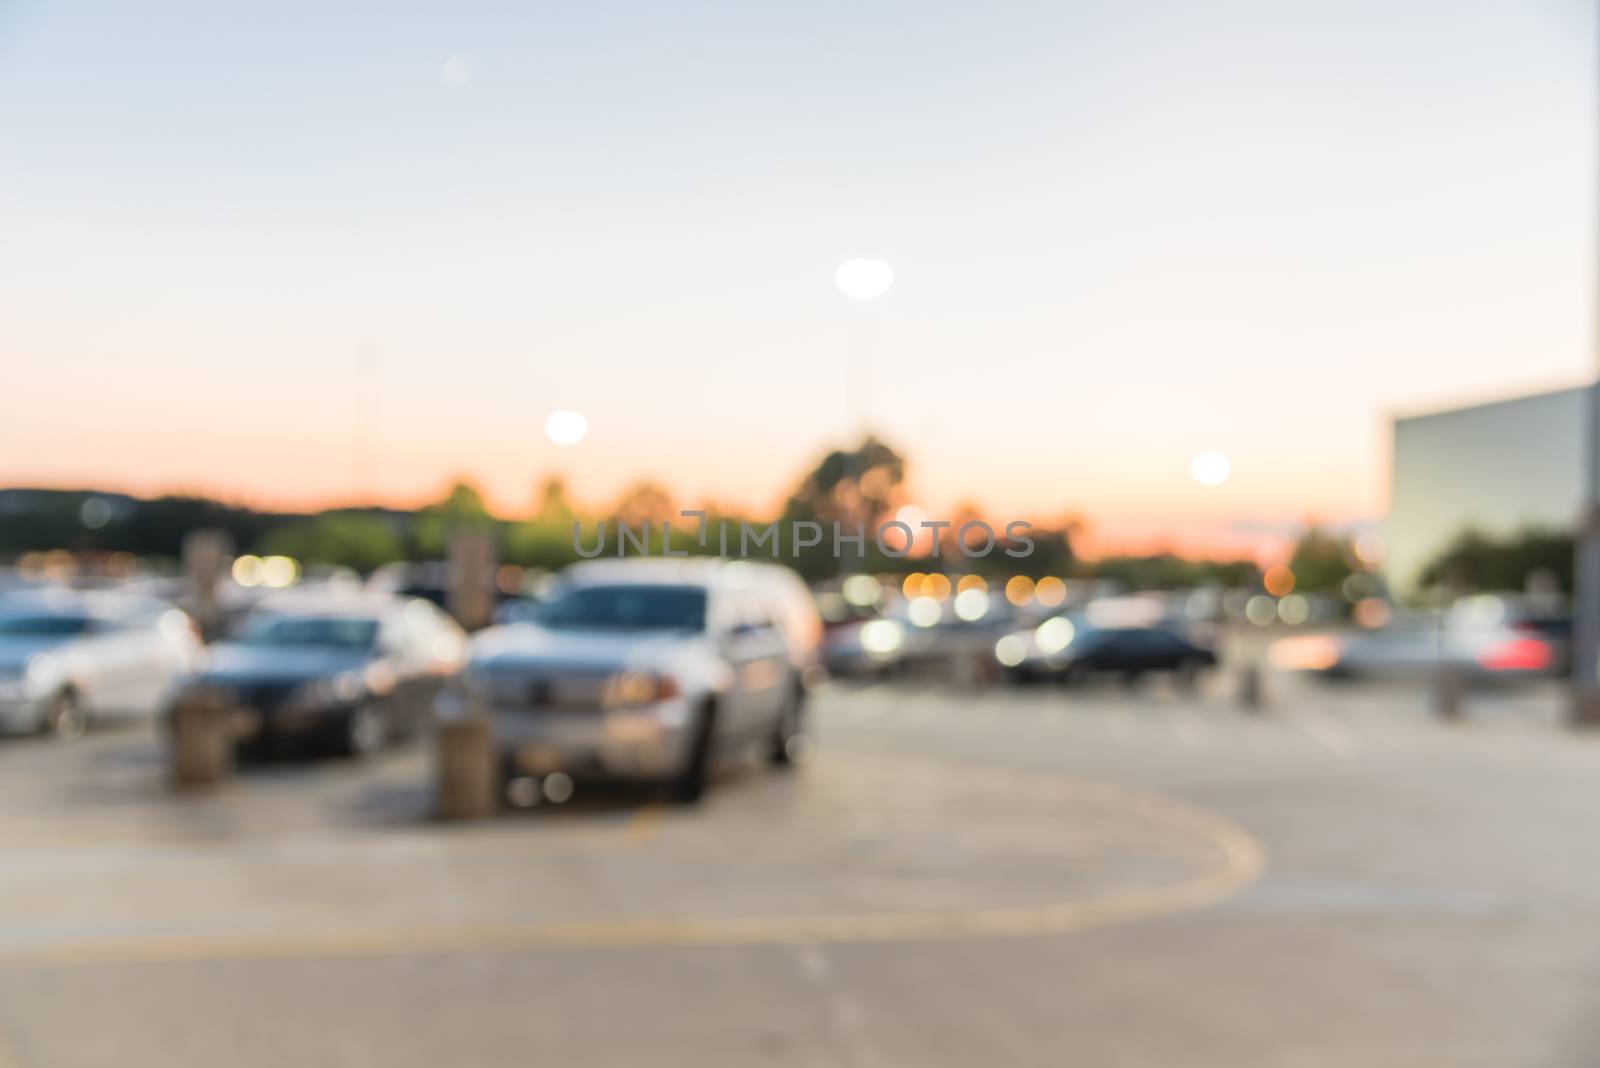 Blurry background exterior of retail stores of shopping mall in Houston, Texas at sunset by trongnguyen